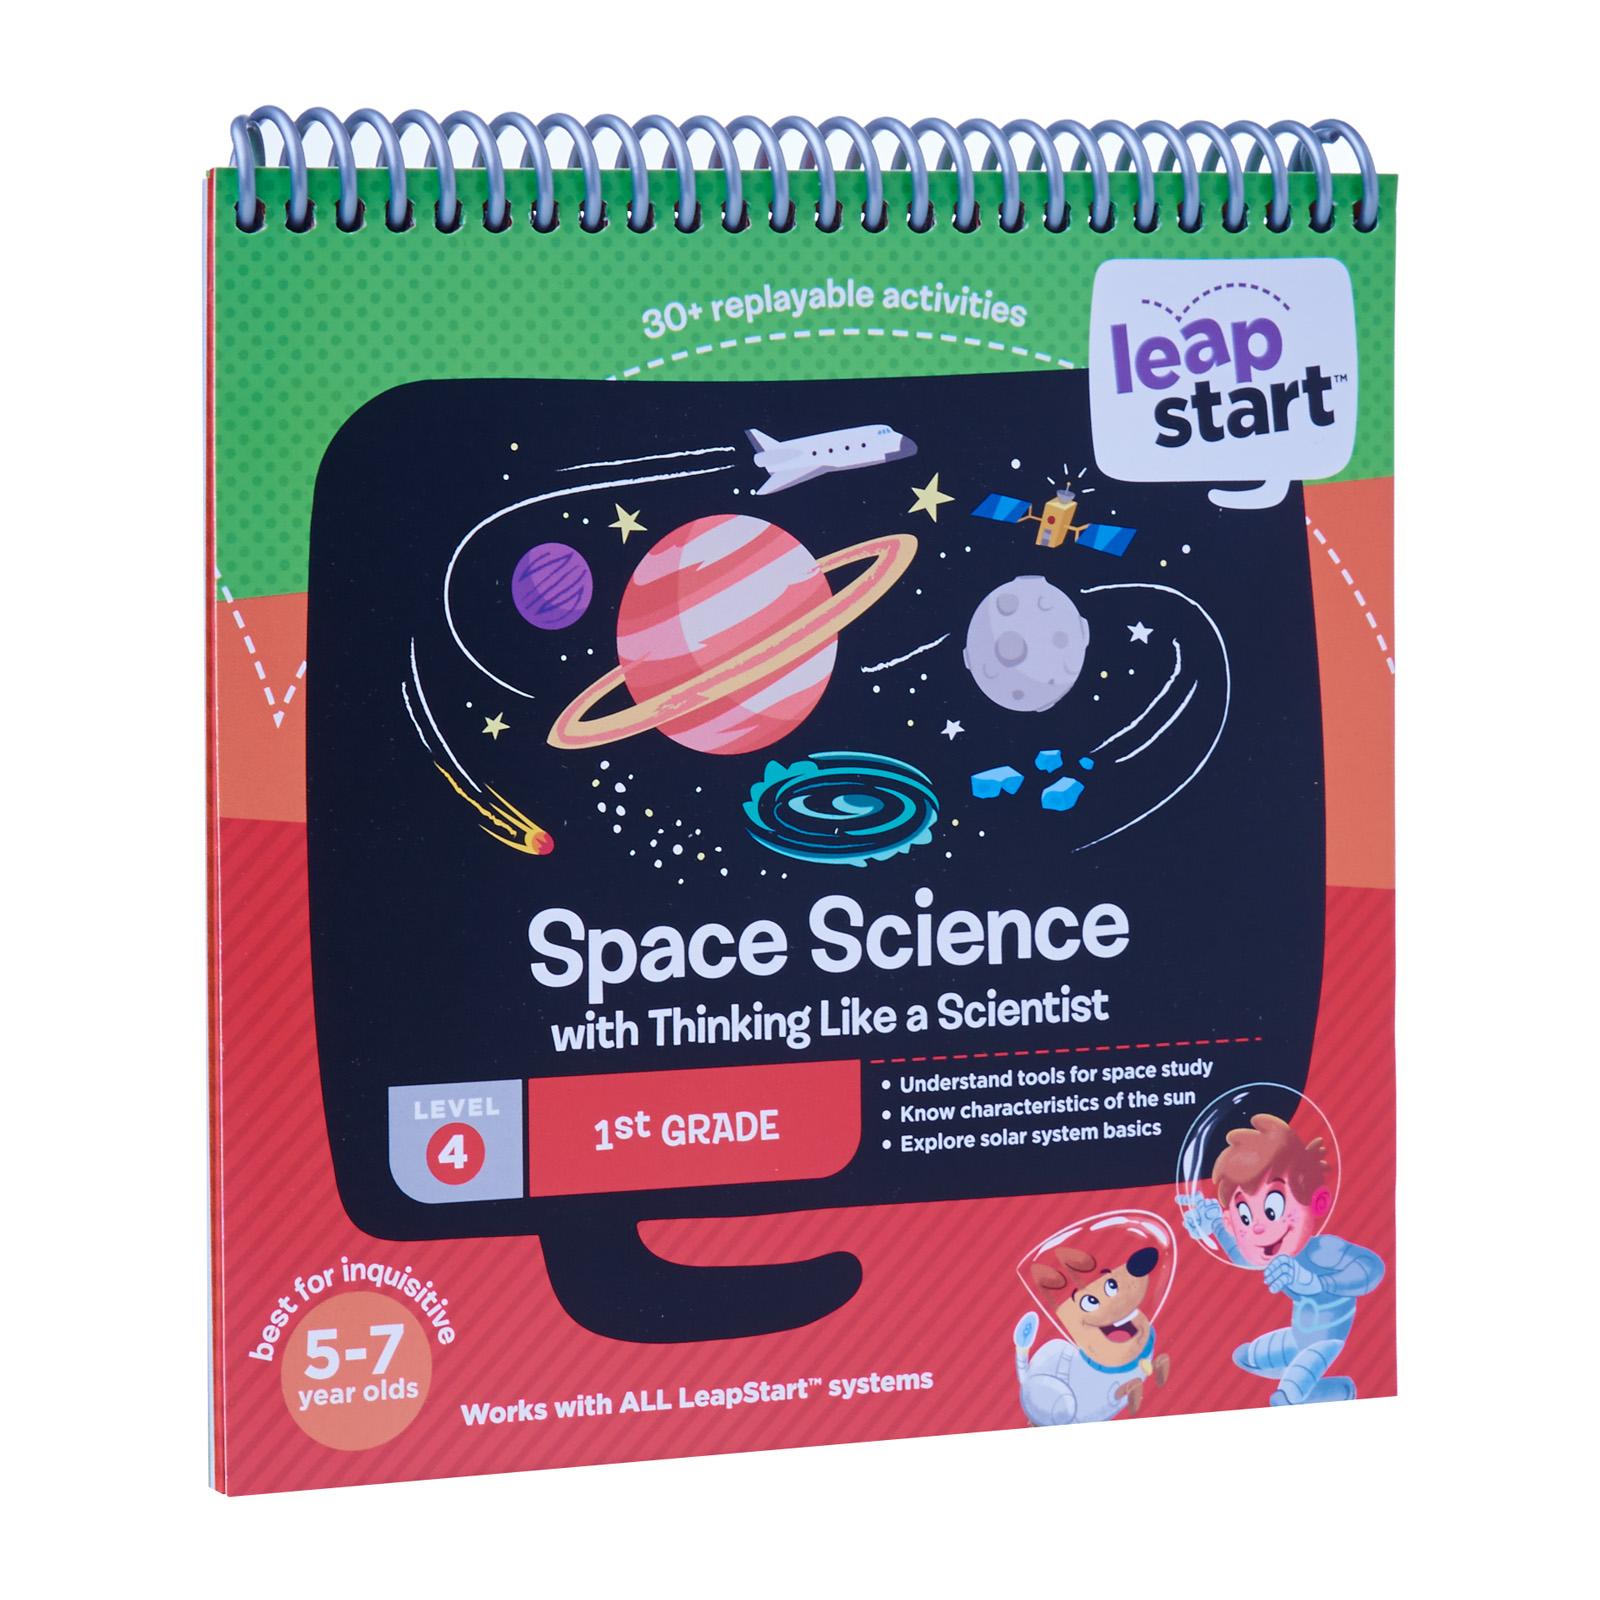 LeapStart™ Space Science with Thinking Like a Scientist 30+ Page Activity Book-Overview